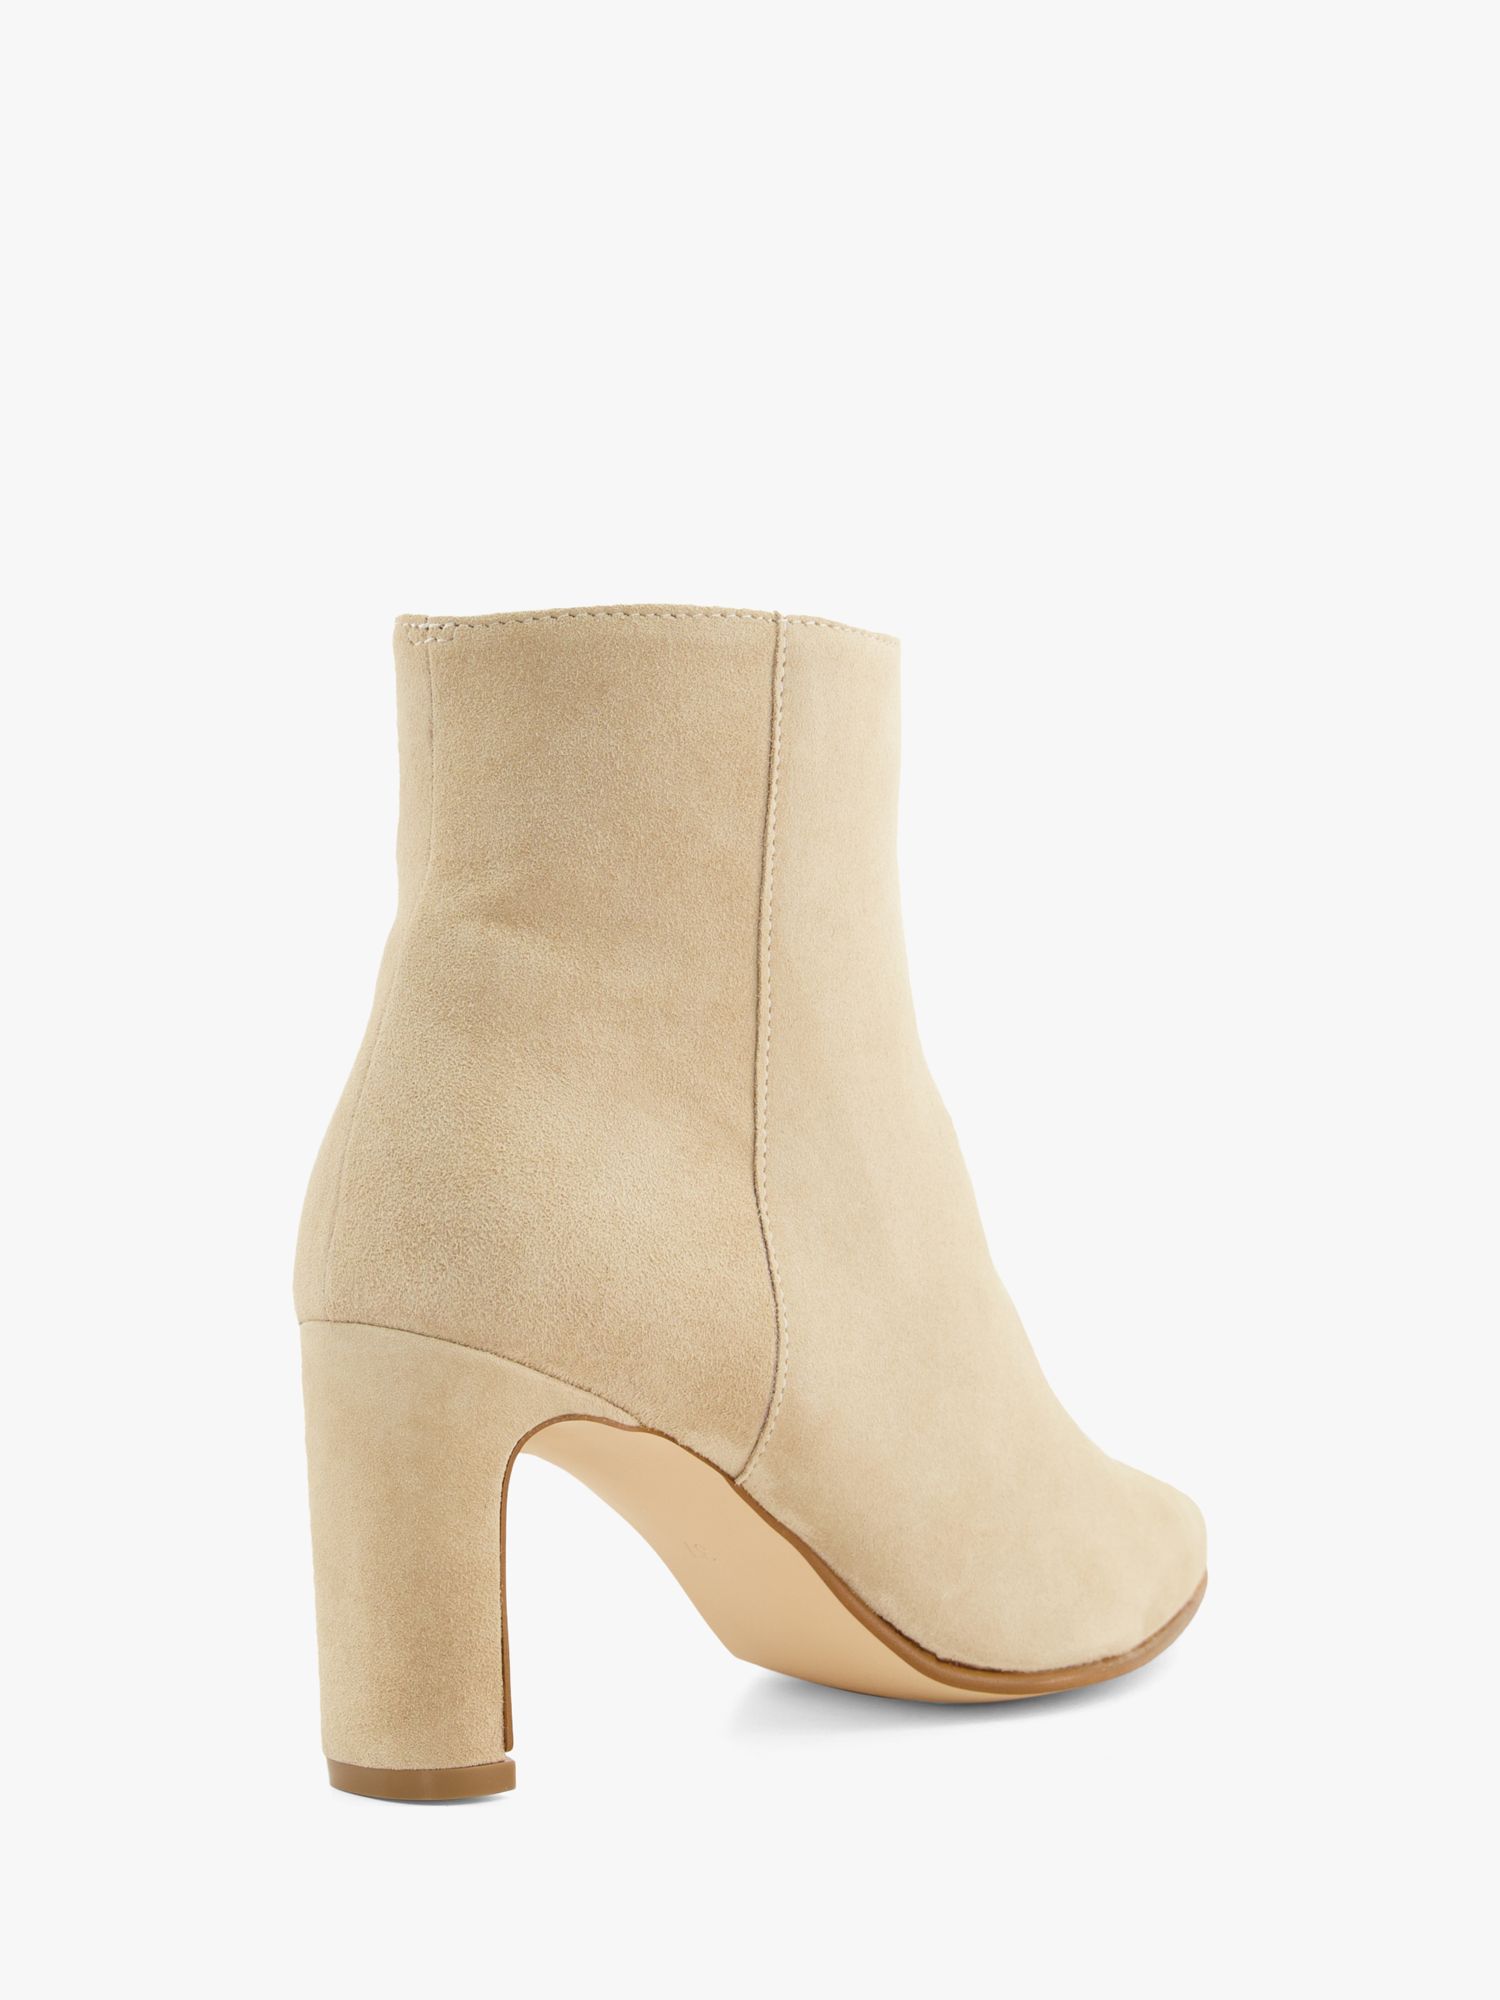 Dune Otta Suede Heel Pointed Ankle Boots, Sand at John Lewis & Partners